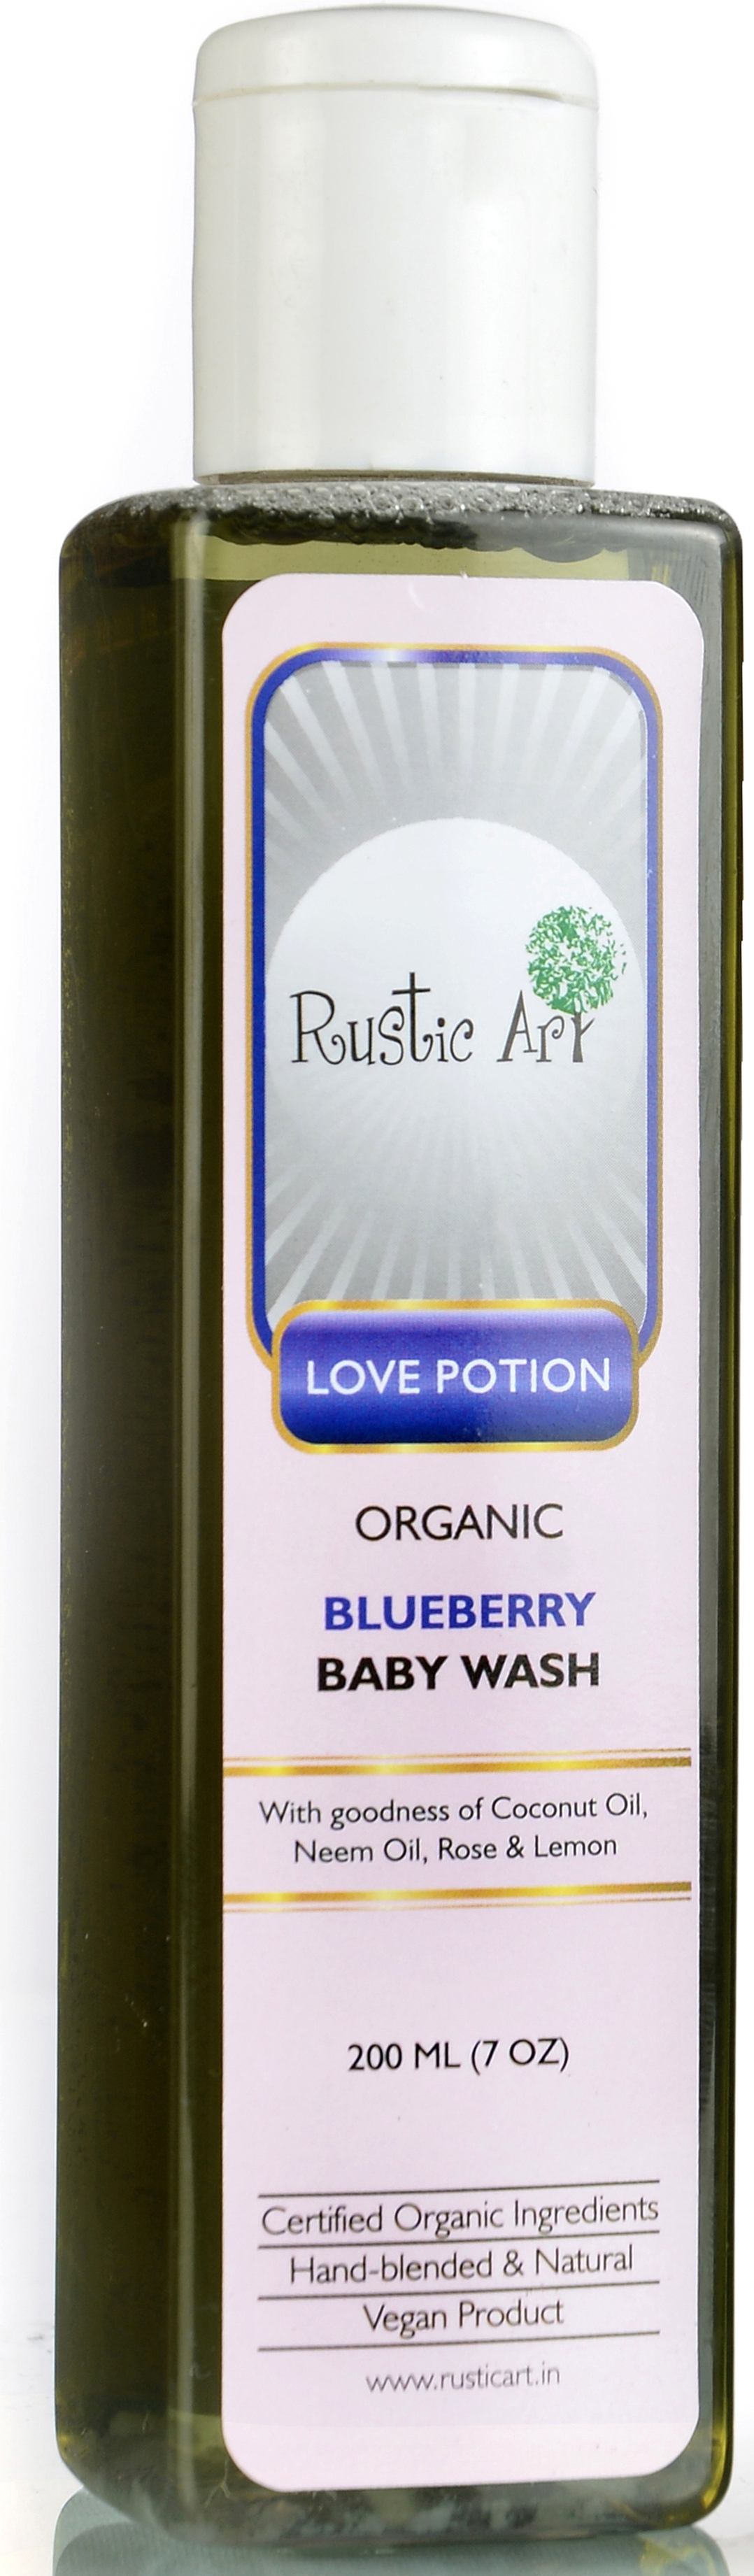 Buy Rustic Art Organic Blueberry Baby Wash at Best Price Online